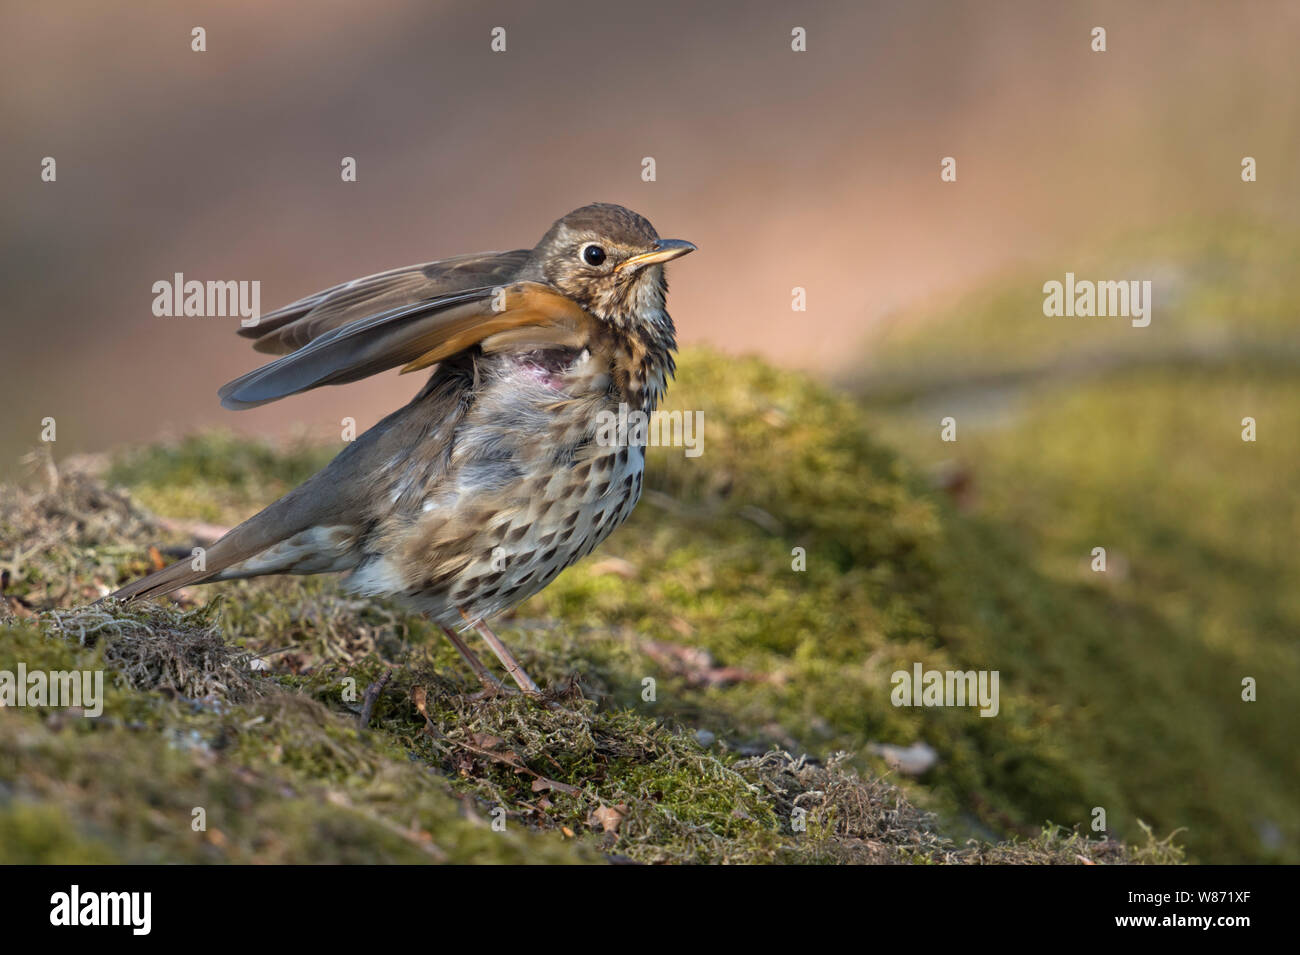 Song Thrush ( Turdus philomelos ) adult in breeding dress, perched on a liitle moss covered mound, stretching, raising its wings, looks funny. Stock Photo